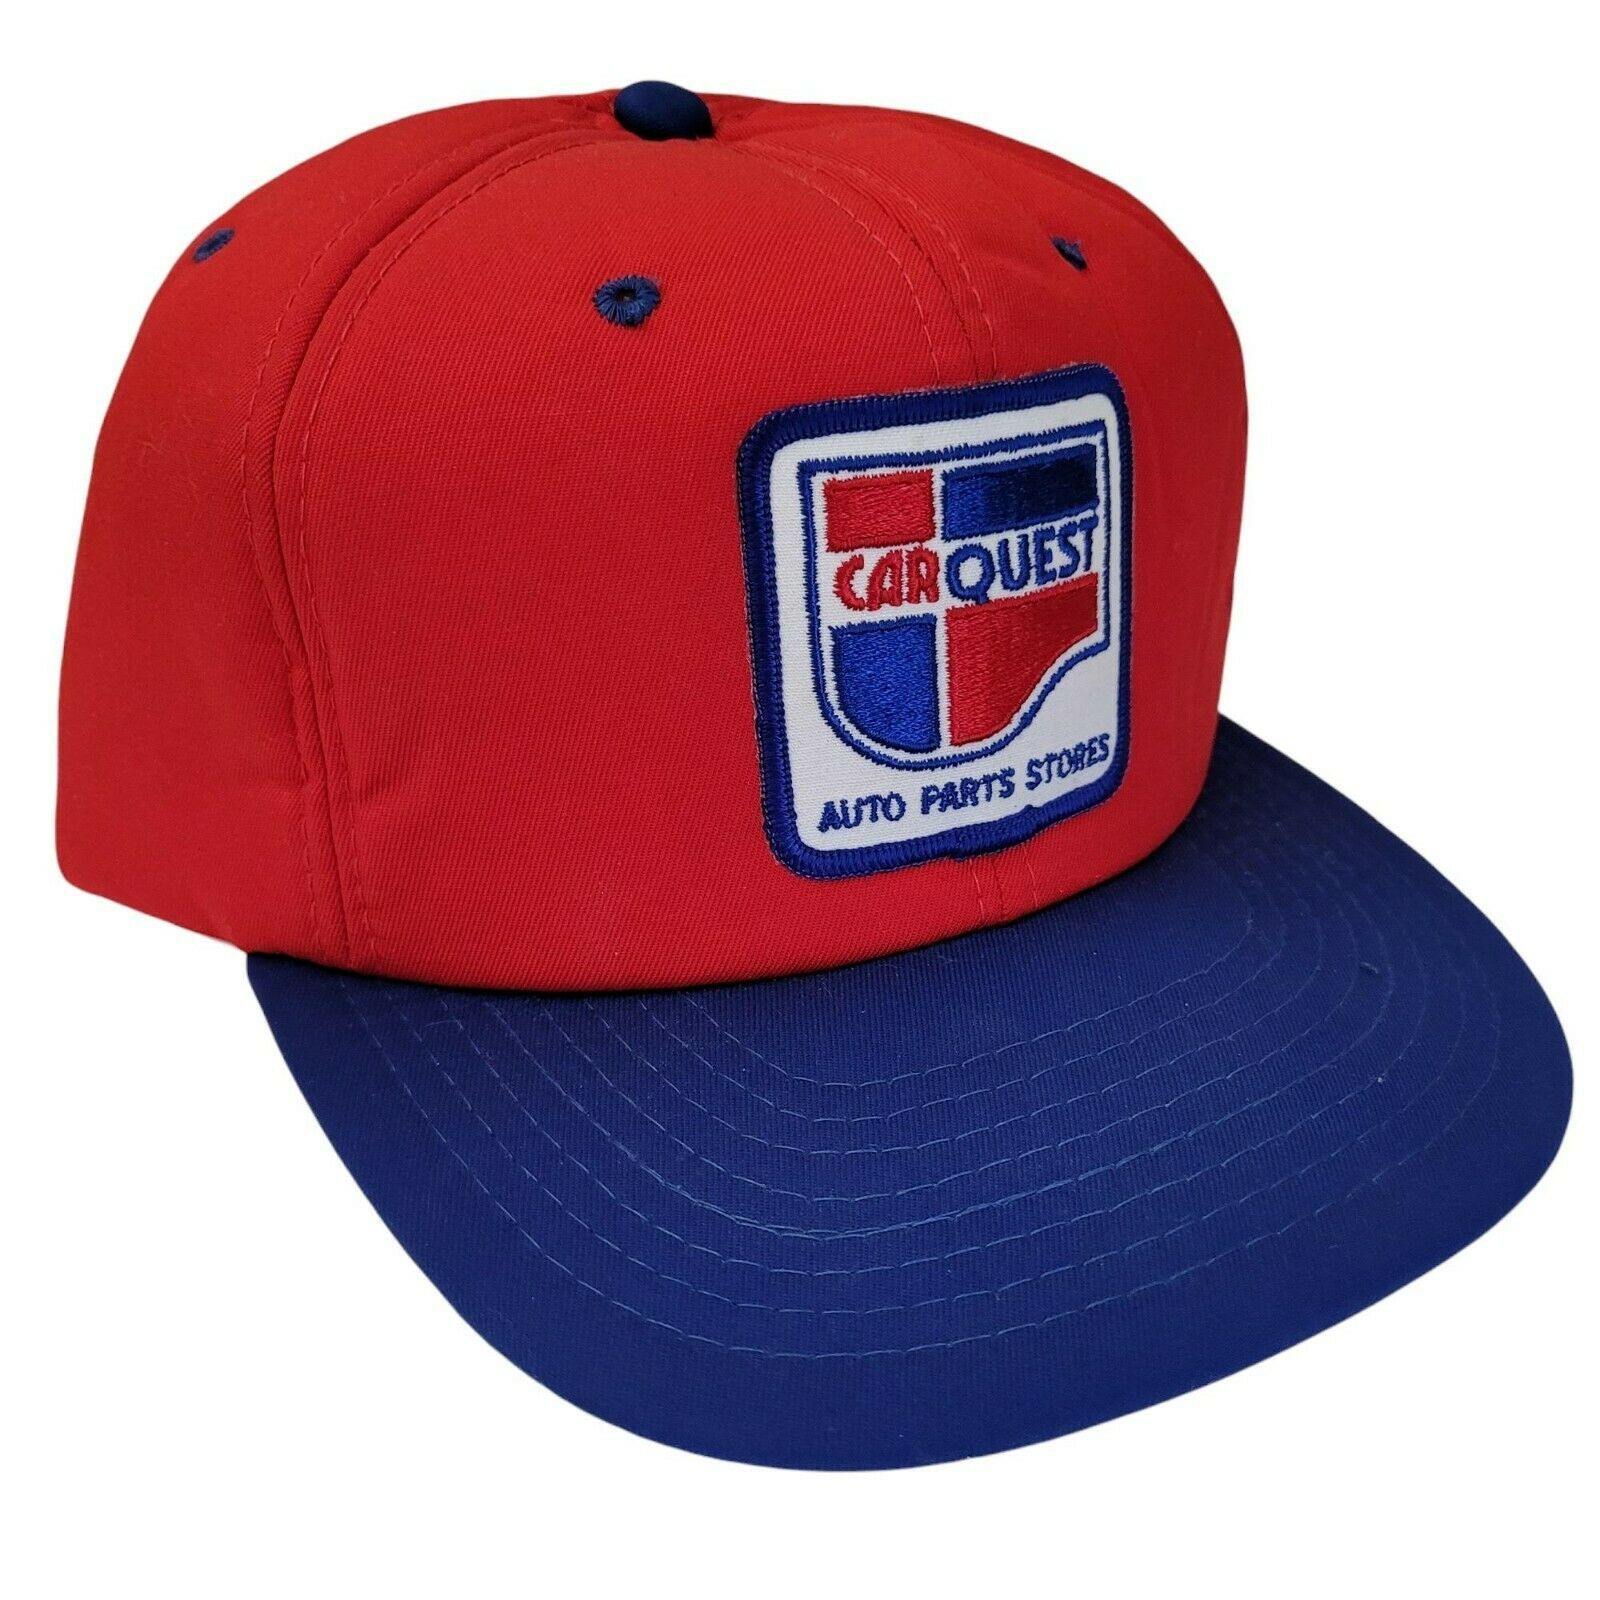 Vintage CarQuest Auto Parts Store Snapback NFL Official Sports Specialties Red - $14.84